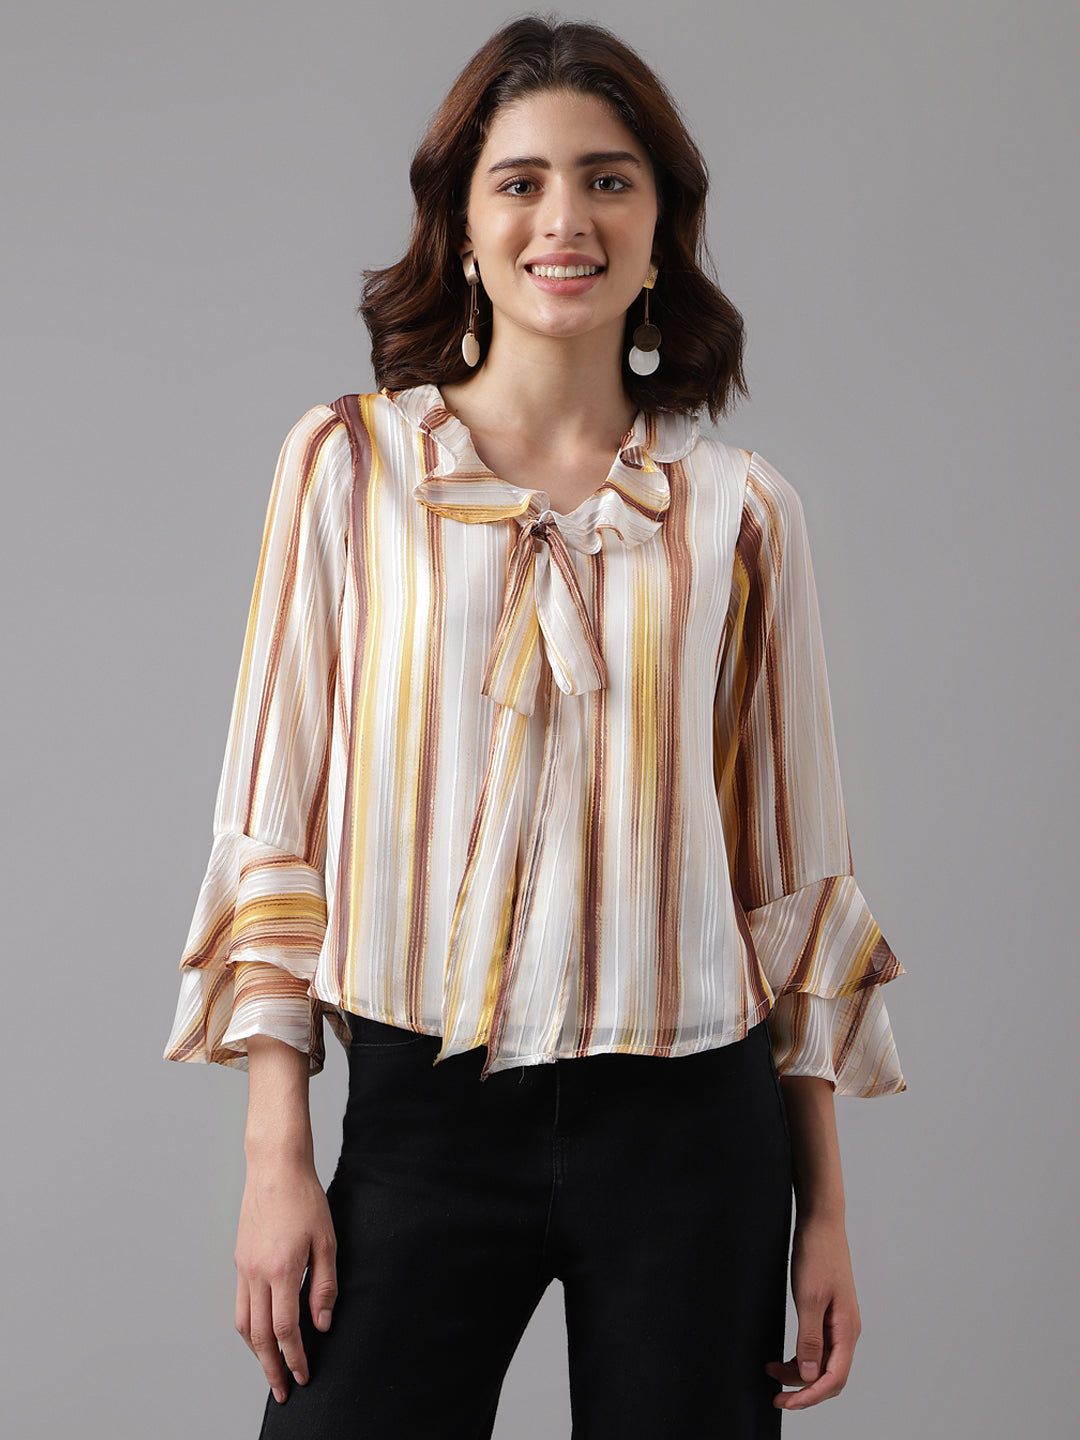 YELLOW FULL SLEEVE PRINTED NORMAL BLOUSE TOP